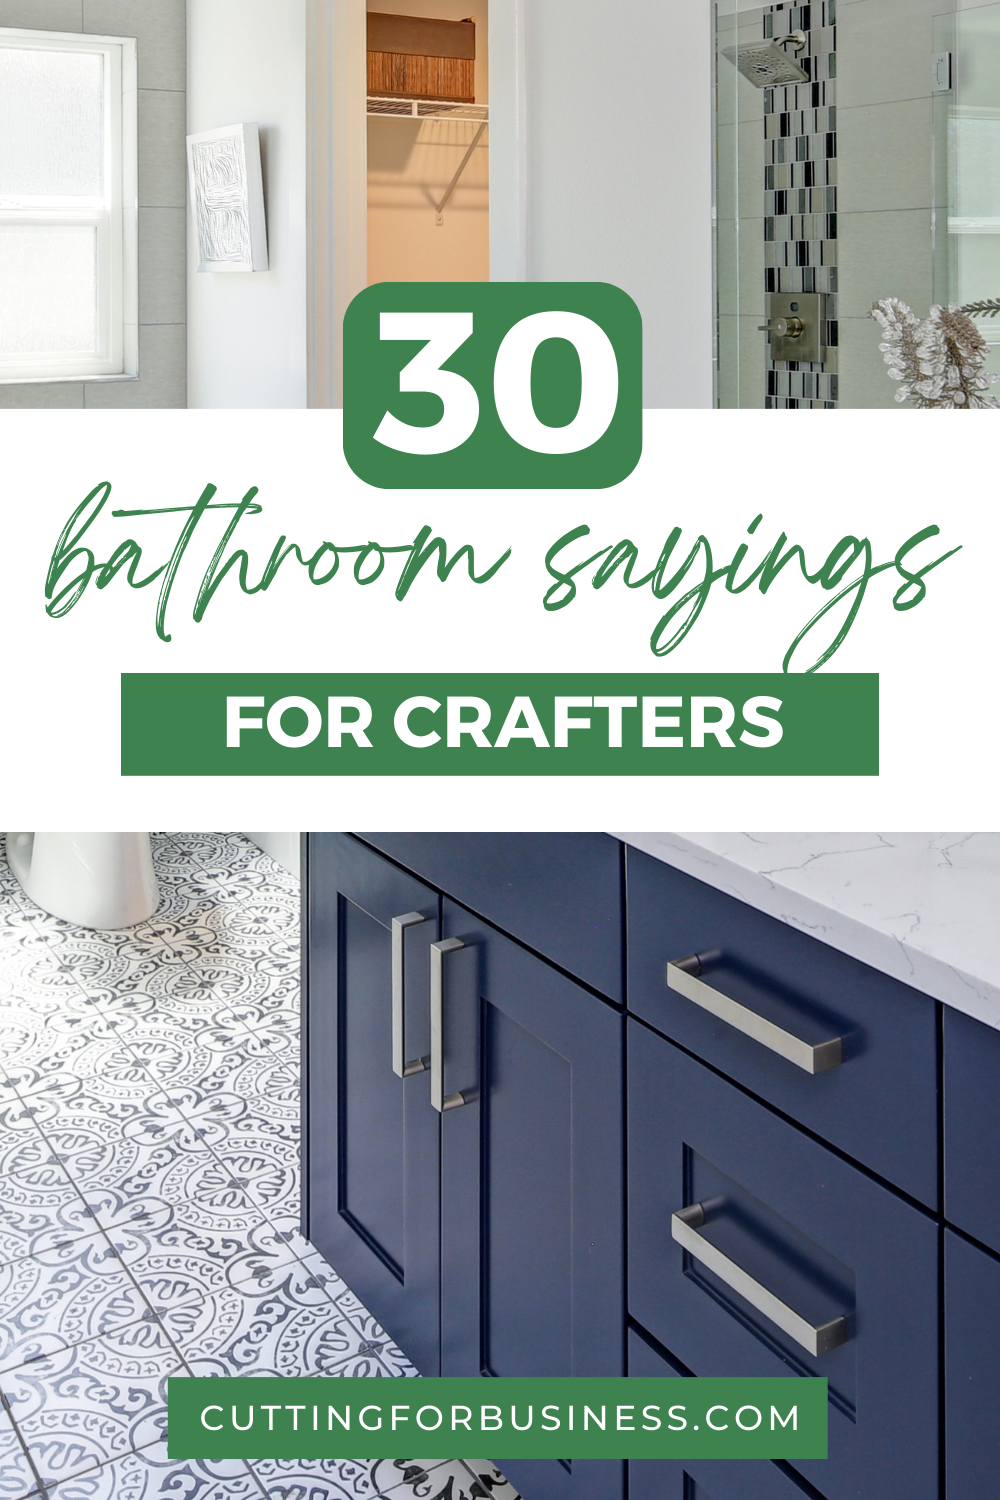 30+ Funny Bathroom Sayings for Crafters - cuttingforbusiness.com.